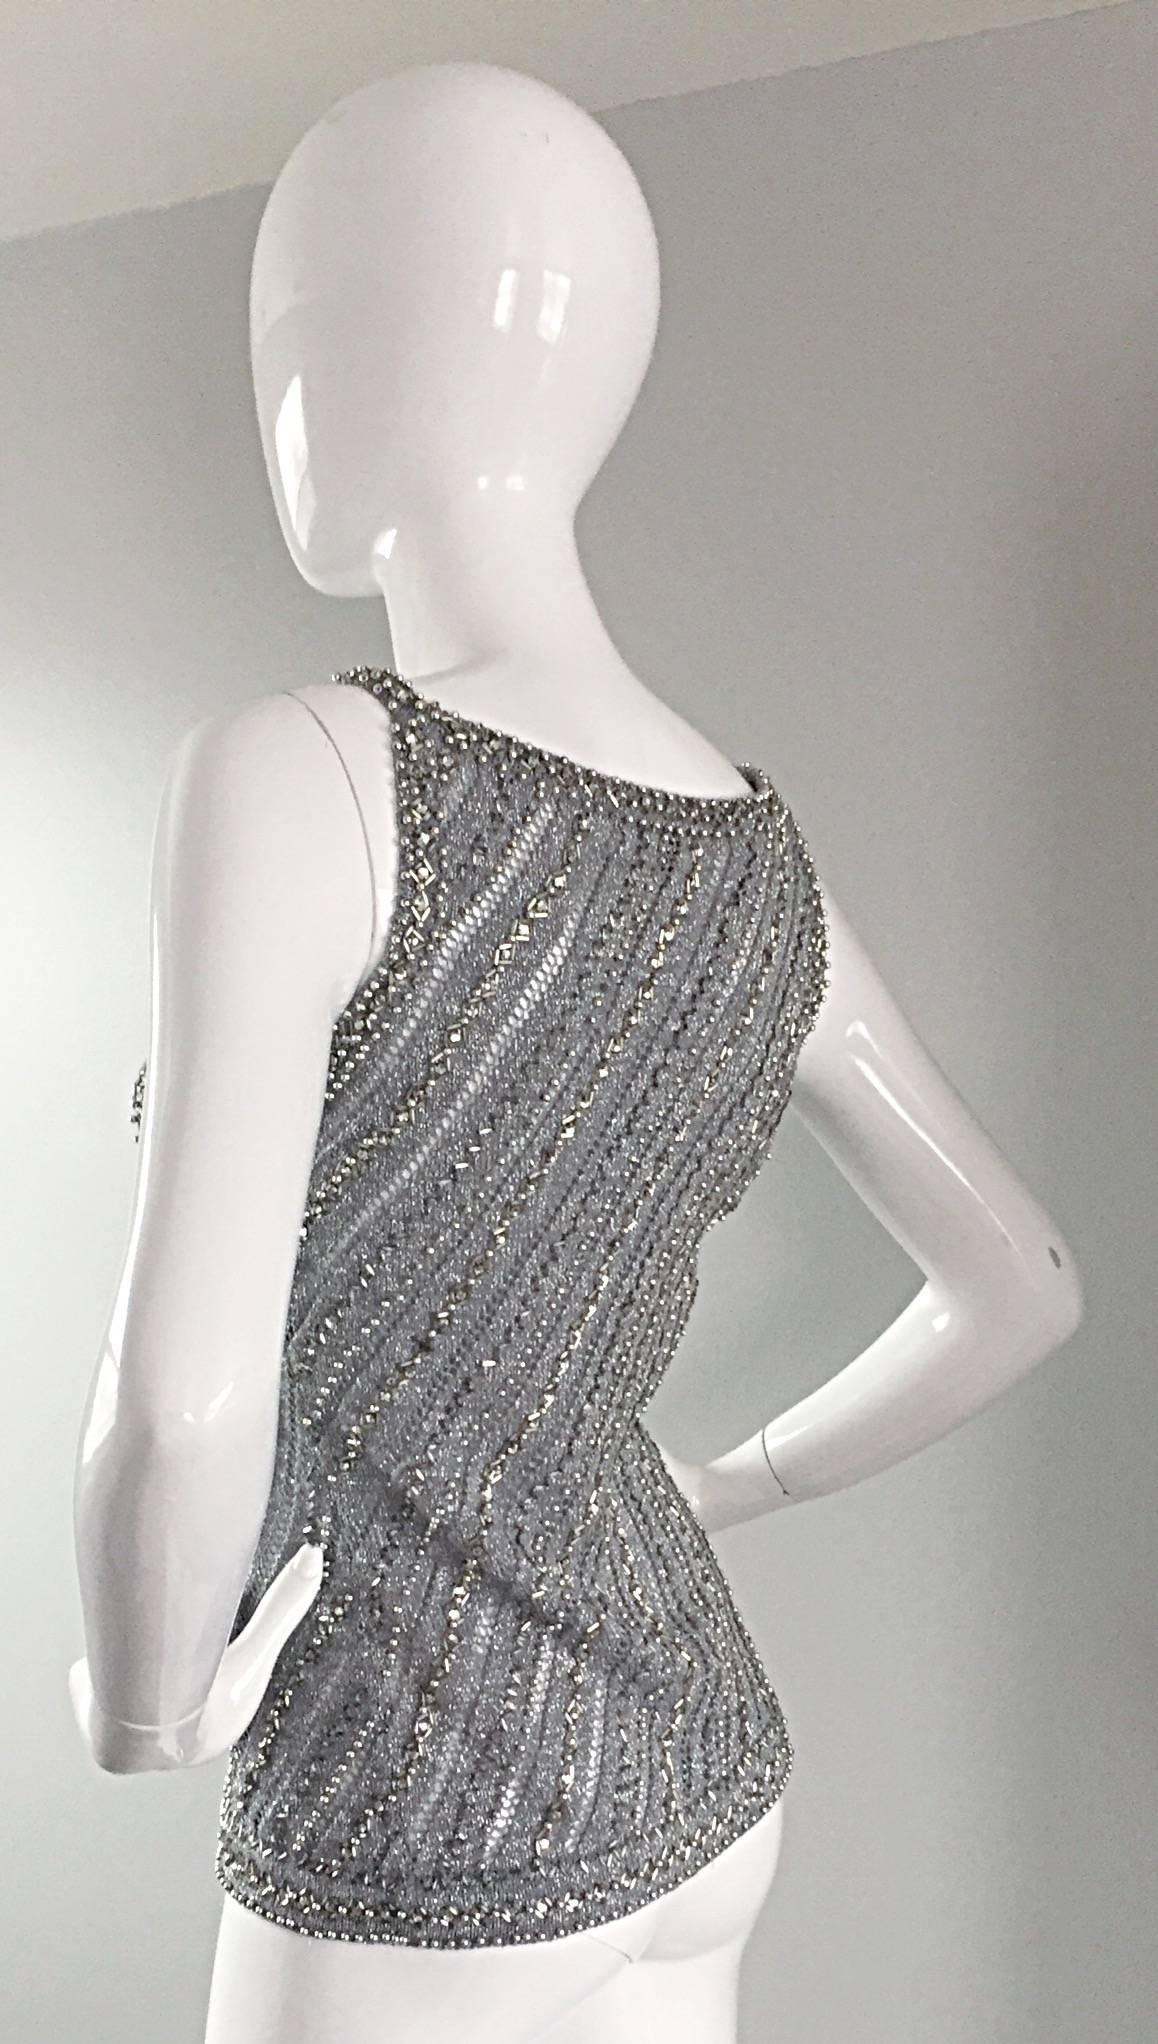 Stunning (and rare) vintage Rizkallah for MALCOLM STARR 1970s gray crochet top! Encrusted with thousands of silver beads and rhinestones throughout the front and back. Crochet detail intermixed. Sleeveless style, with sleeves fully beaded. Couture